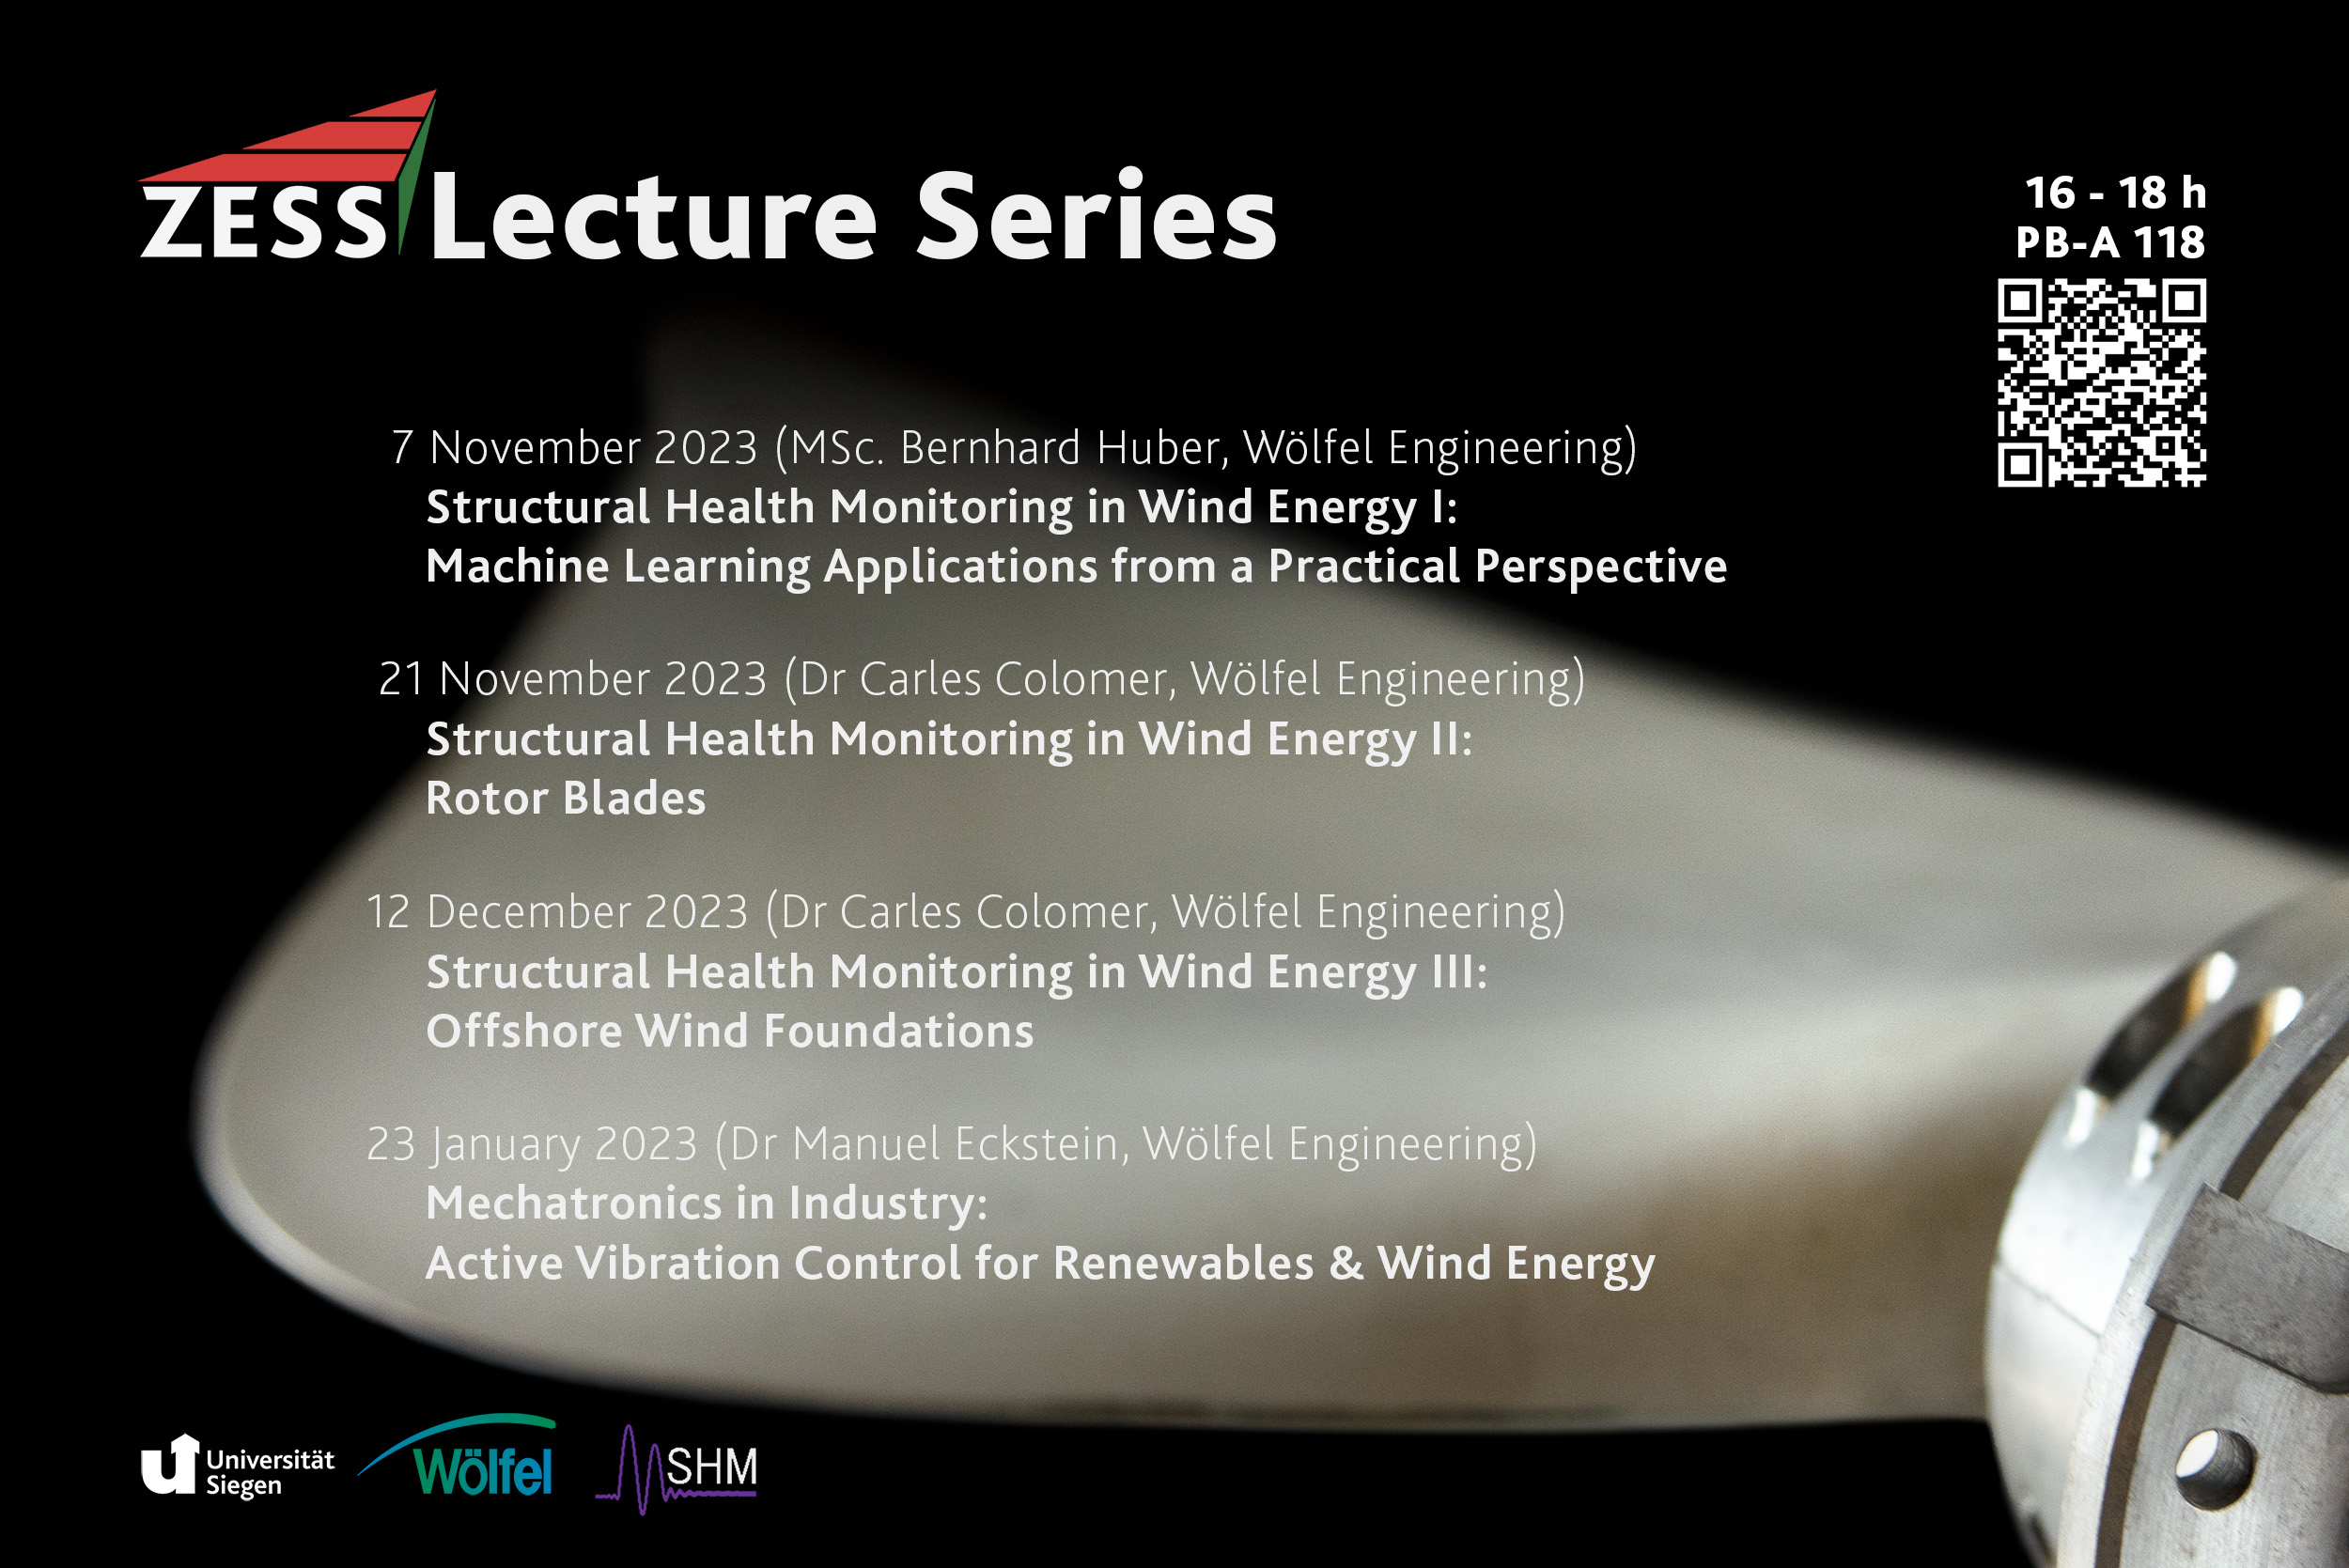 ZESS Lecture Series 2023/2024 Poster for Wind Energy 